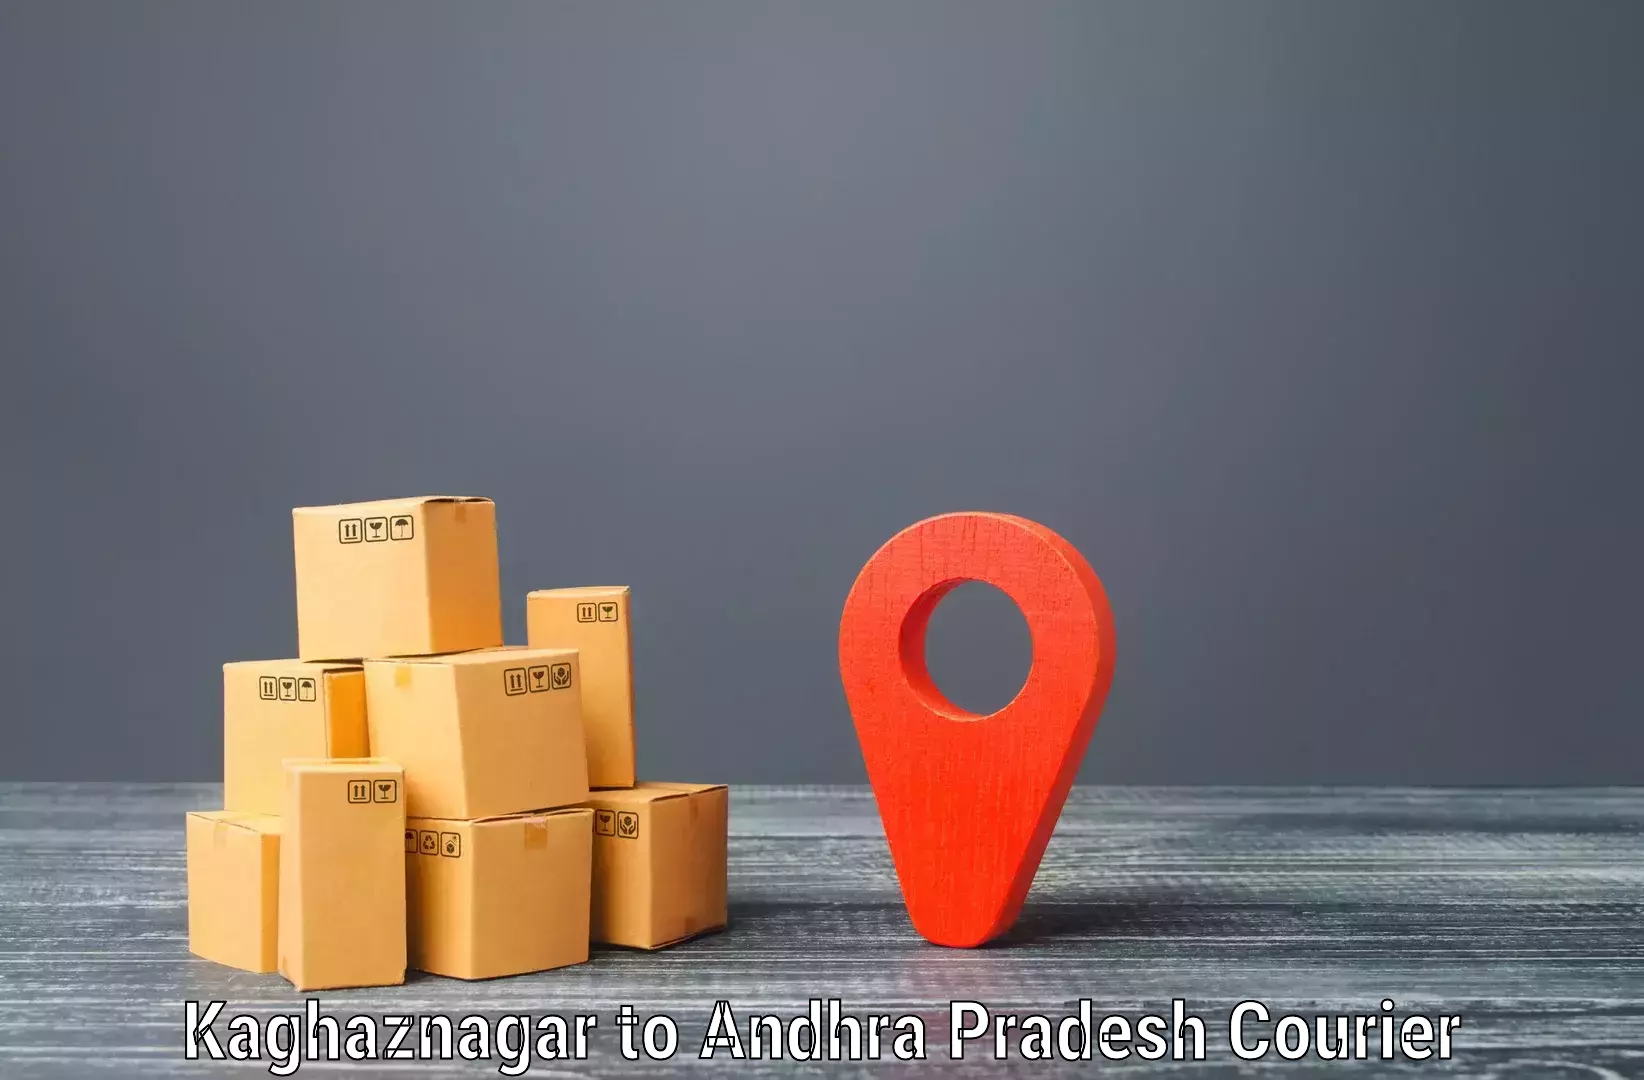 Reliable shipping solutions Kaghaznagar to Visakhapatnam Port